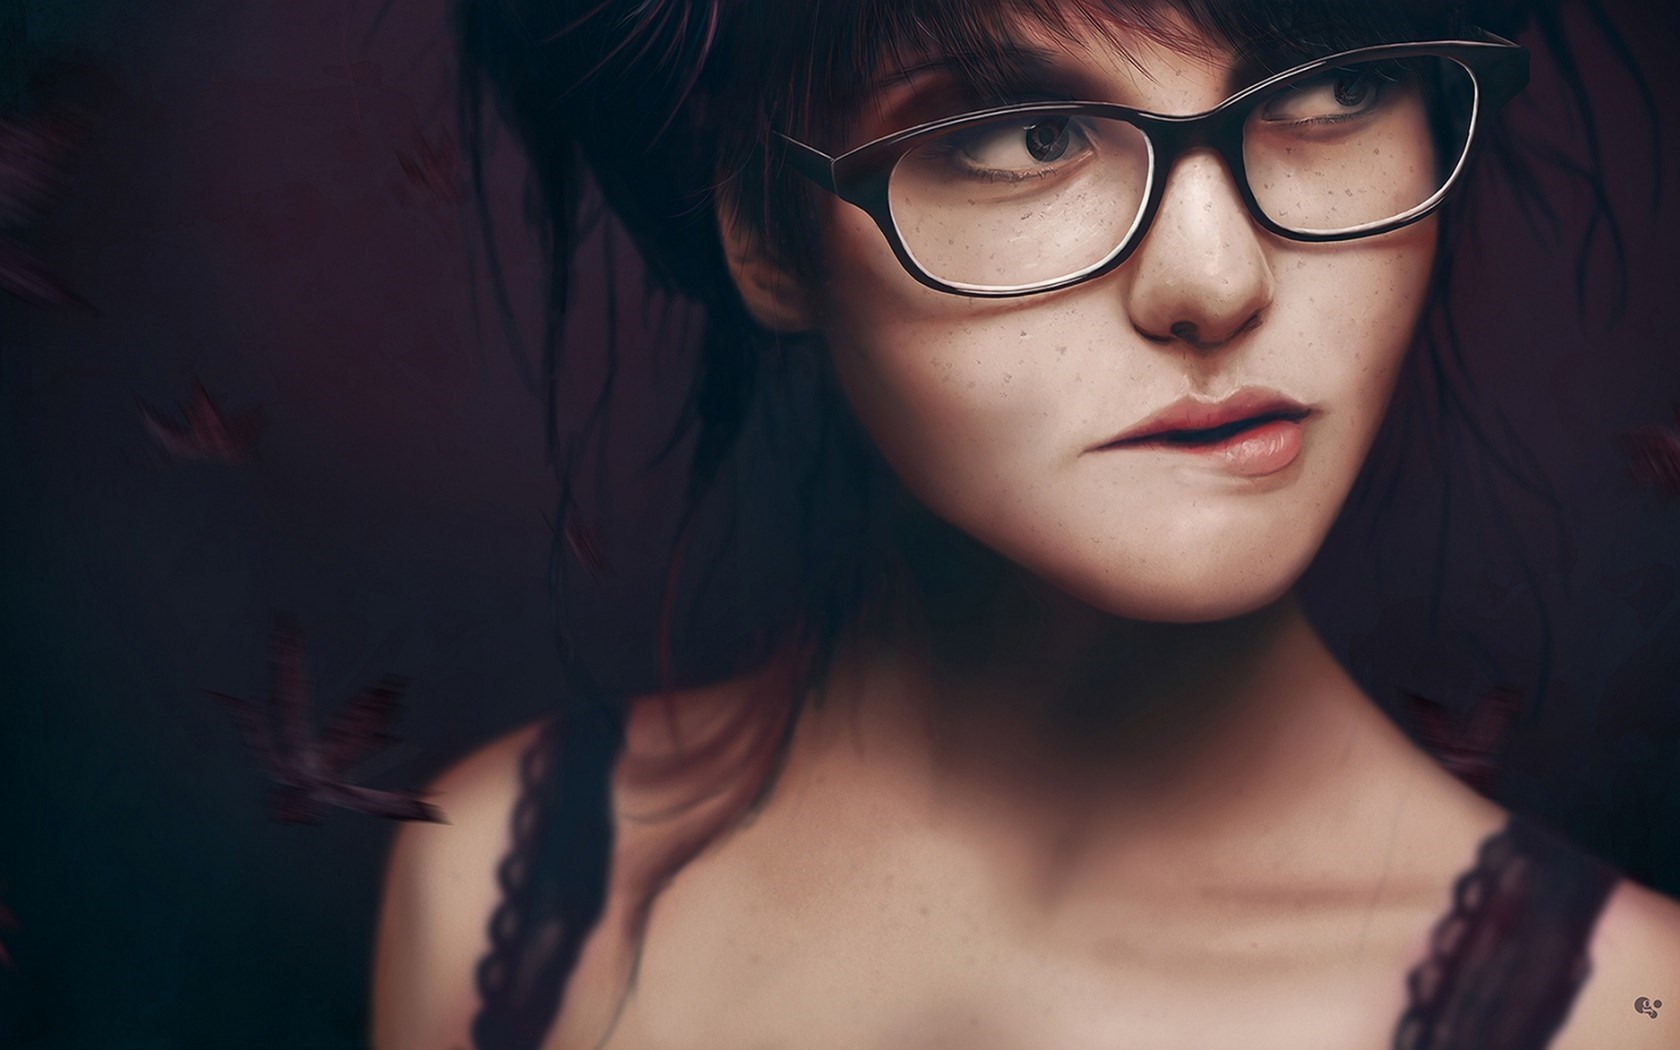 Beautiful Girls With Glasses Wallpaper